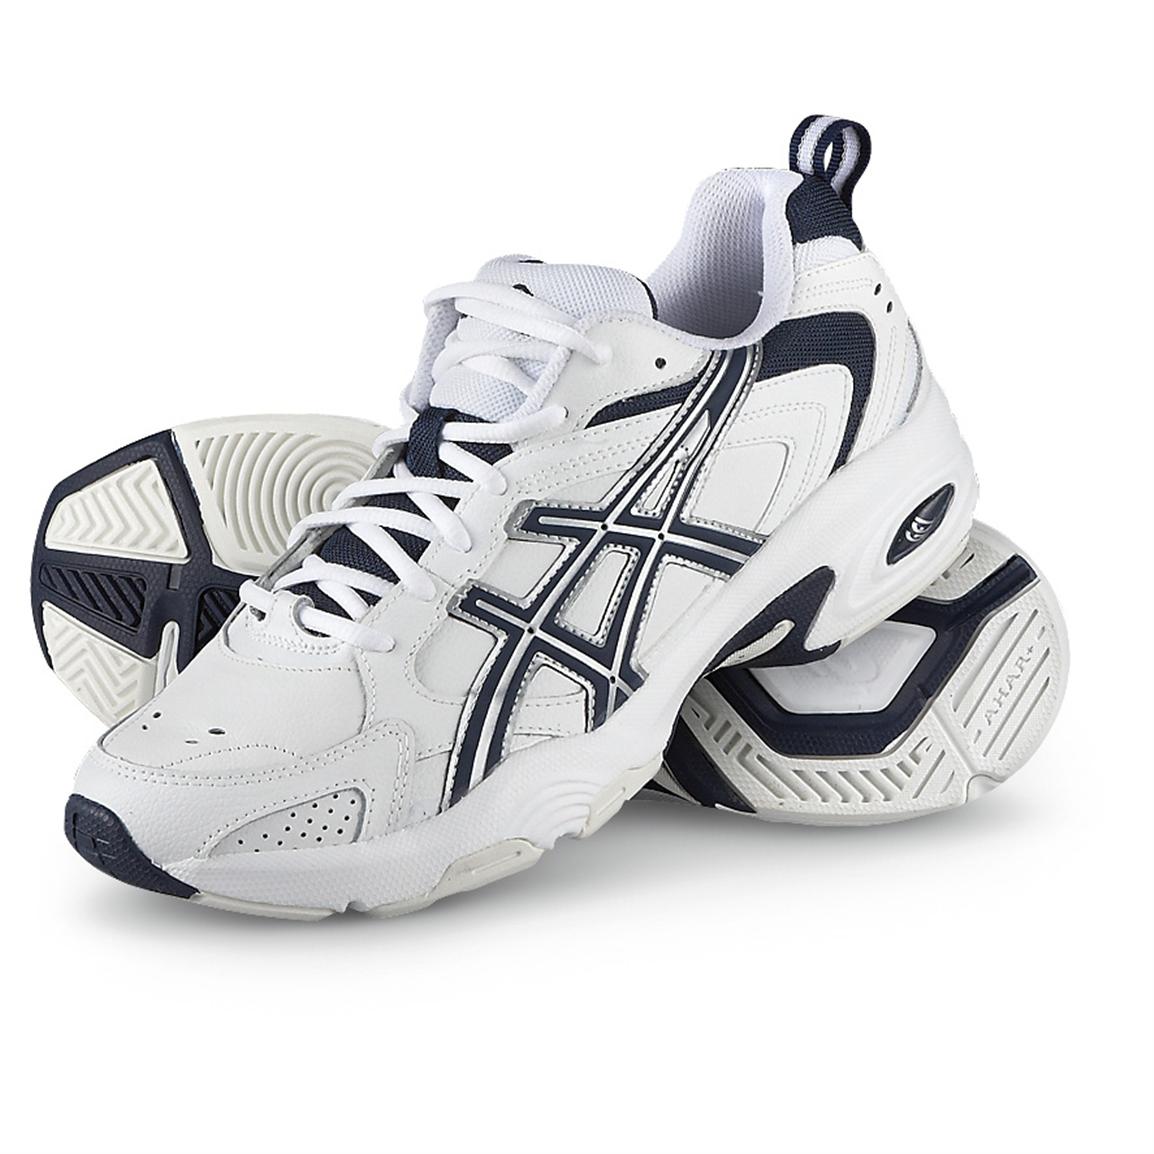 Men's ASICS® GEL-TRX® Trainer Athletic Shoes, White / Navy - 297285,  Running Shoes & Sneakers at Sportsman's Guide